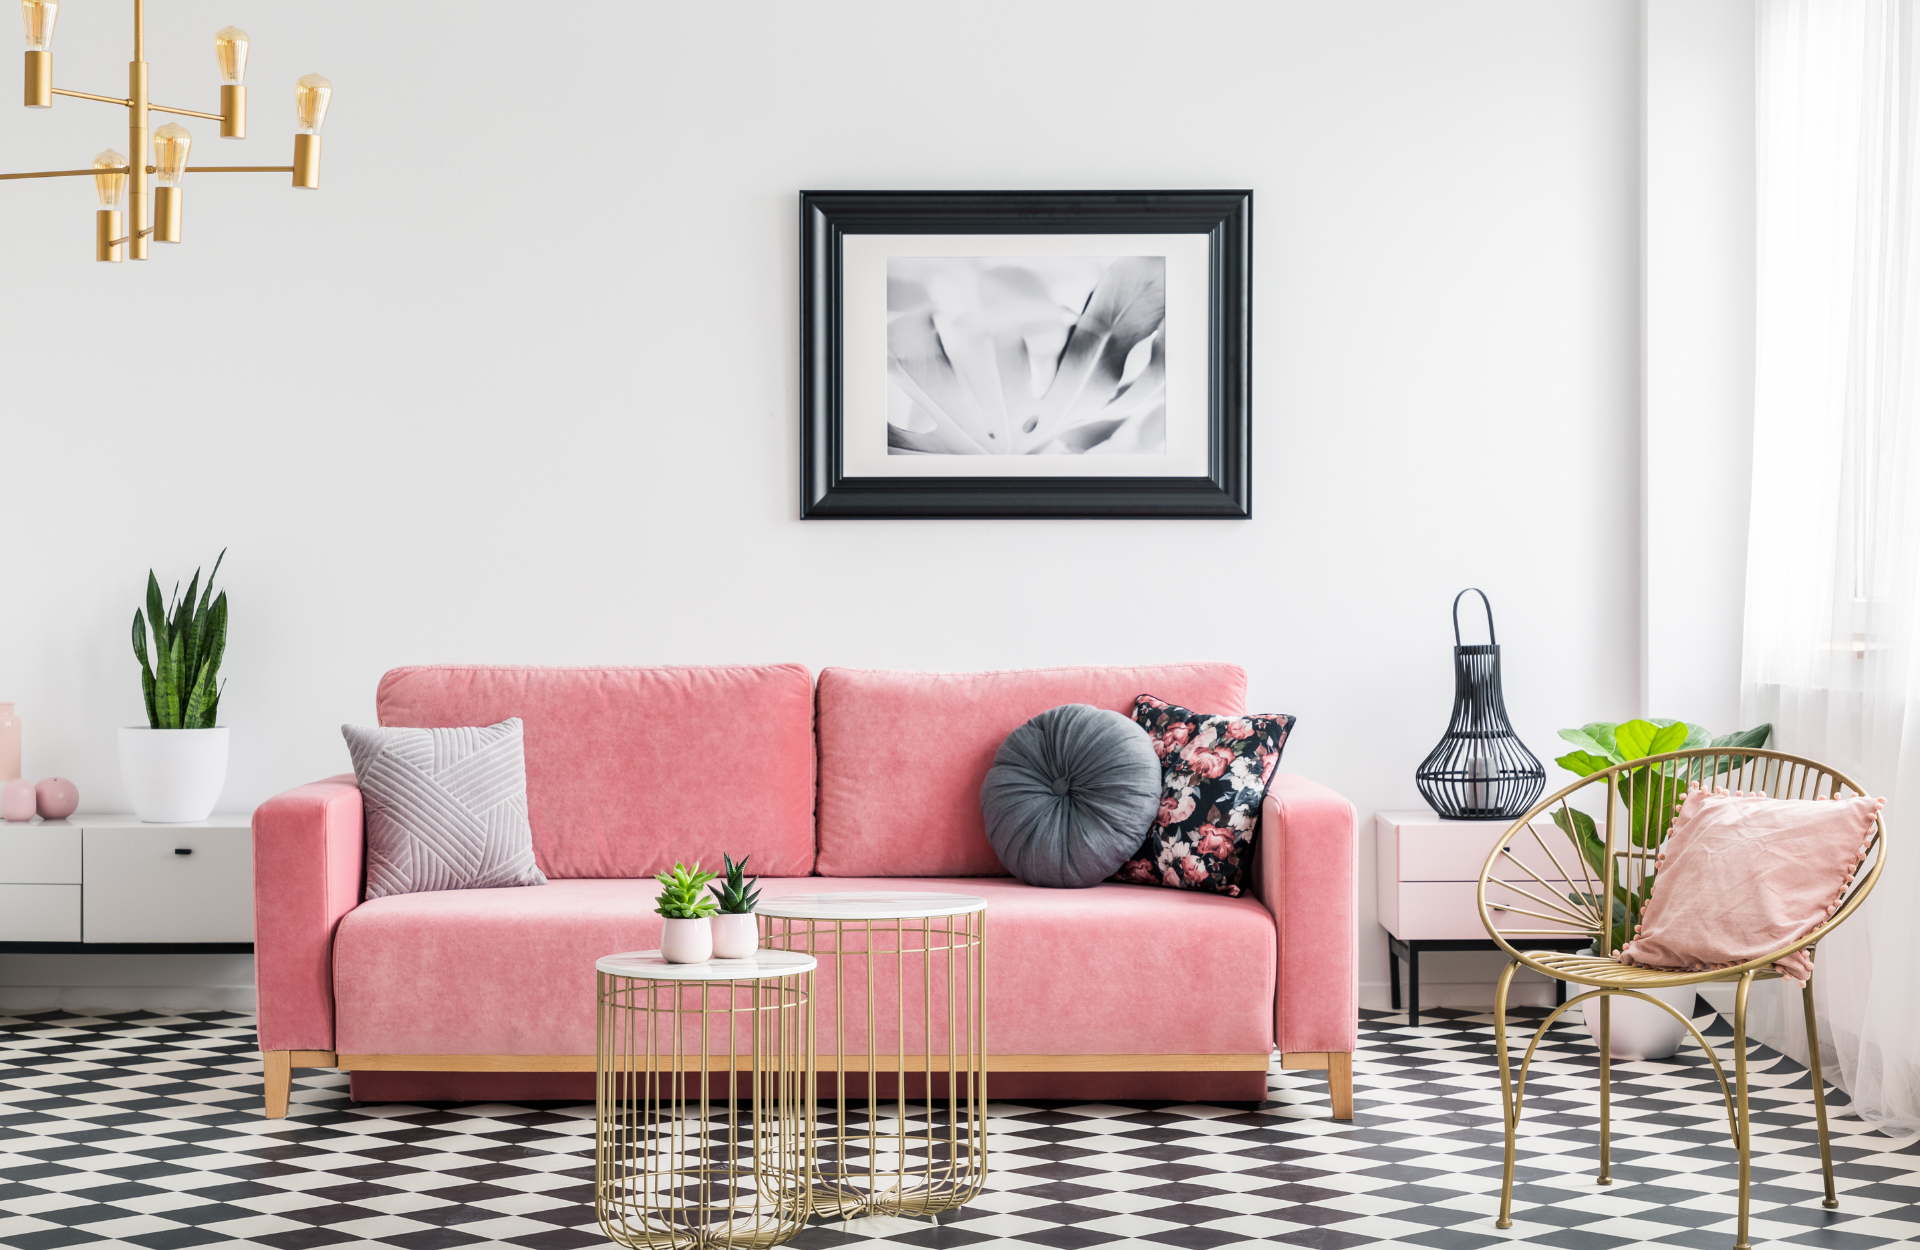 Living room with pink sofa and black and white patterned floor